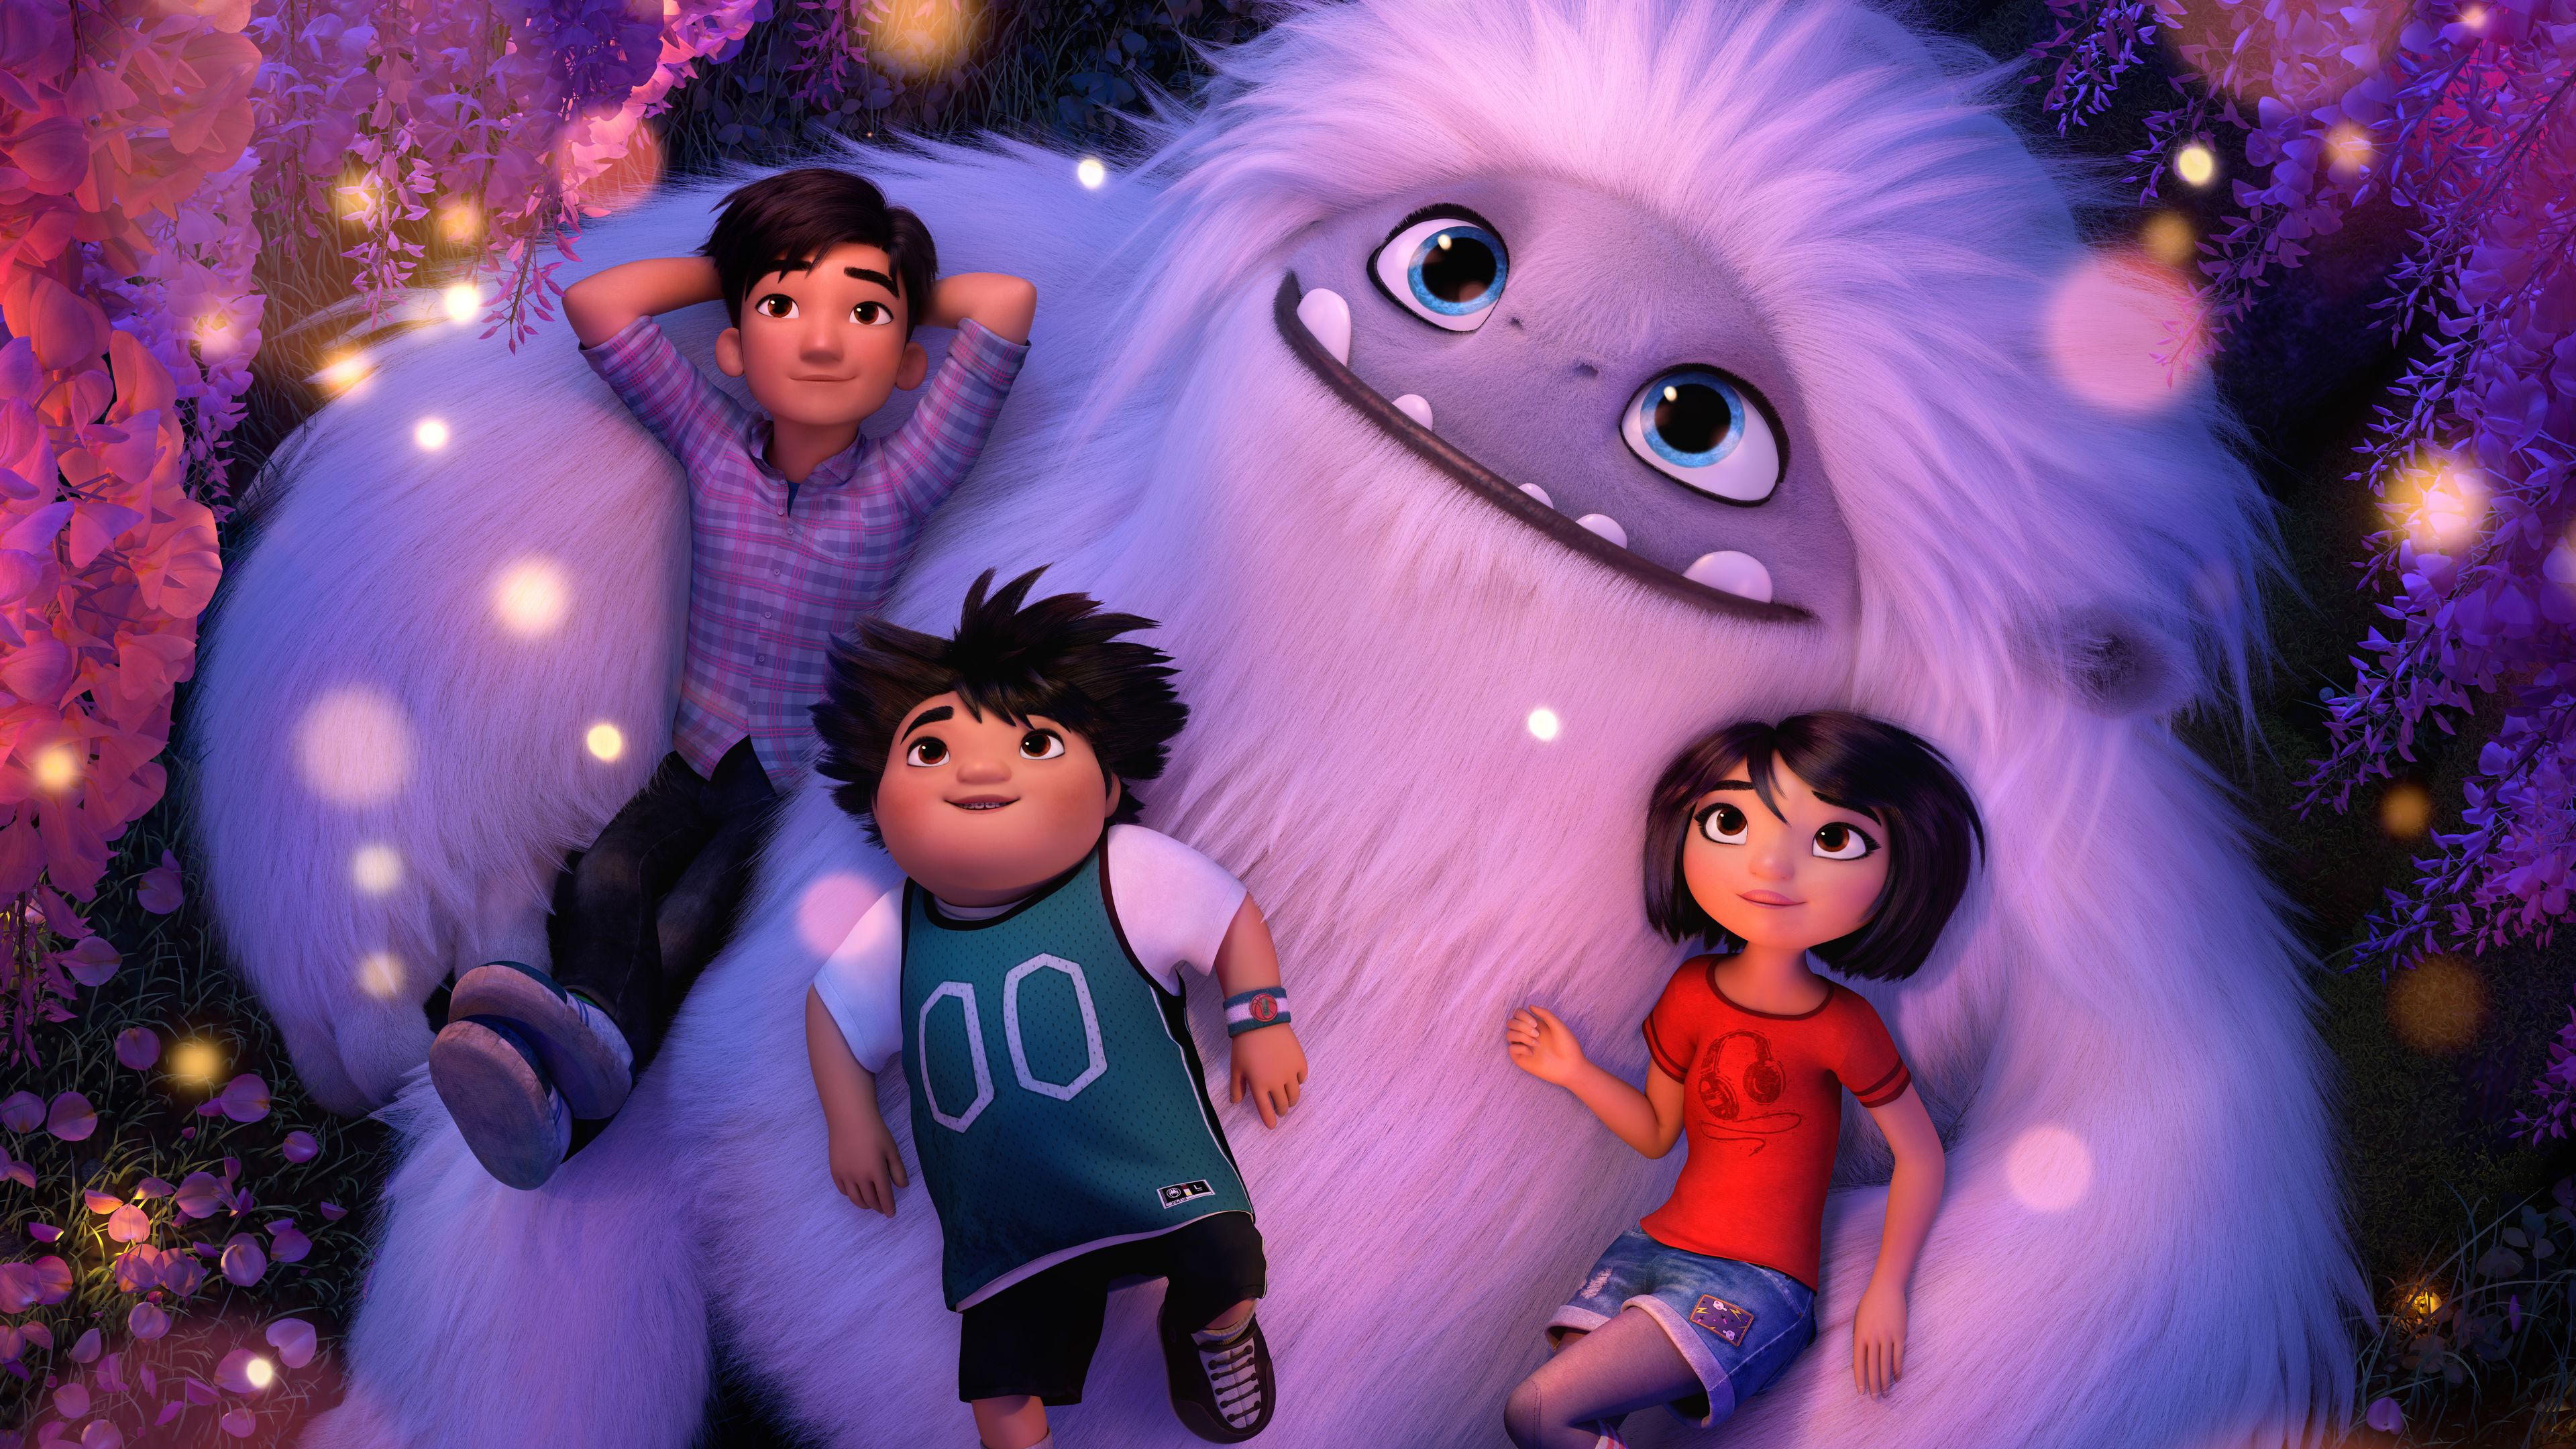 Wallpaper 4k Abominable Animated Movie 2019 movies wallpaper, 4k